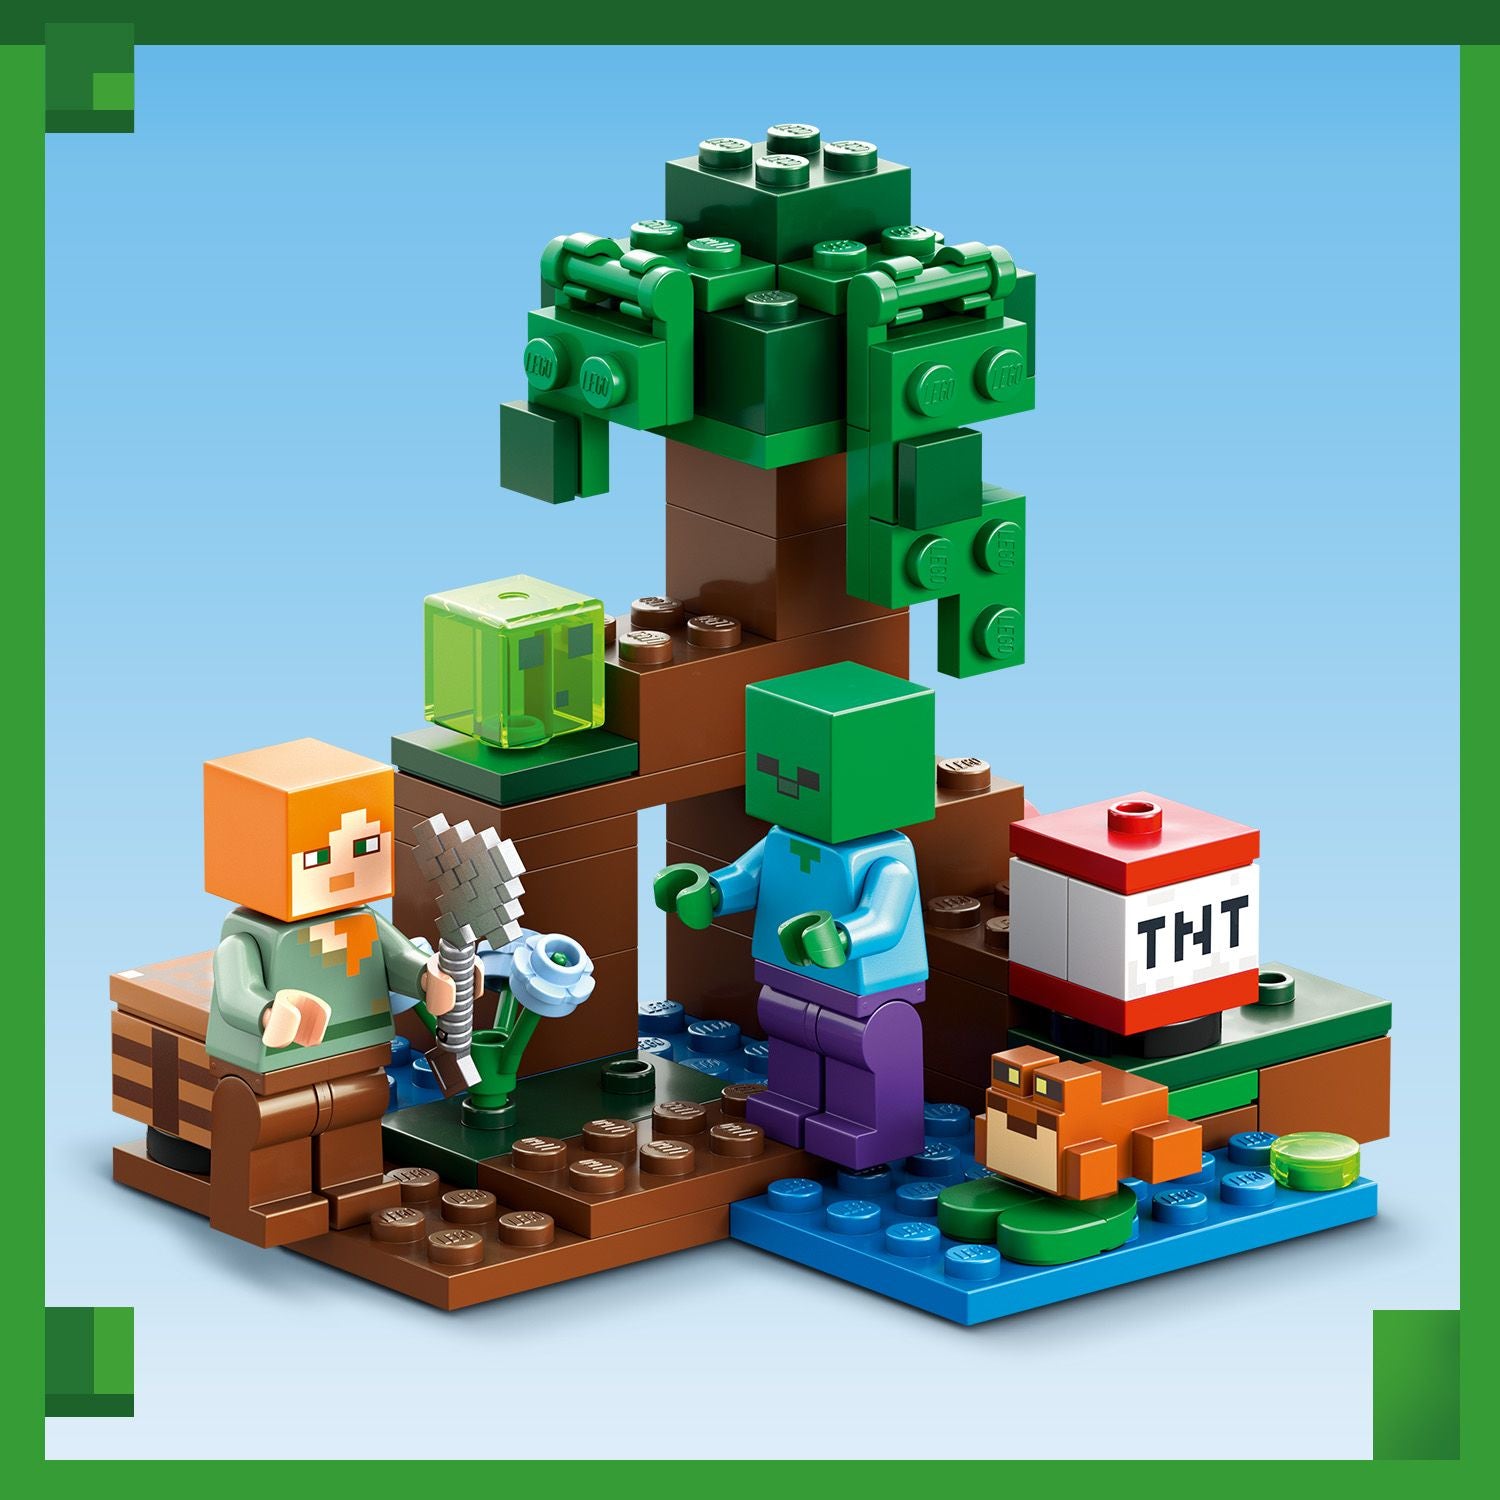 LEGO Minecraft The Swamp Adventure 21240, Building Game Construction Toy  with Alex and Zombie Figures in Biome, Birthday Gift Idea for Kids Ages 8+